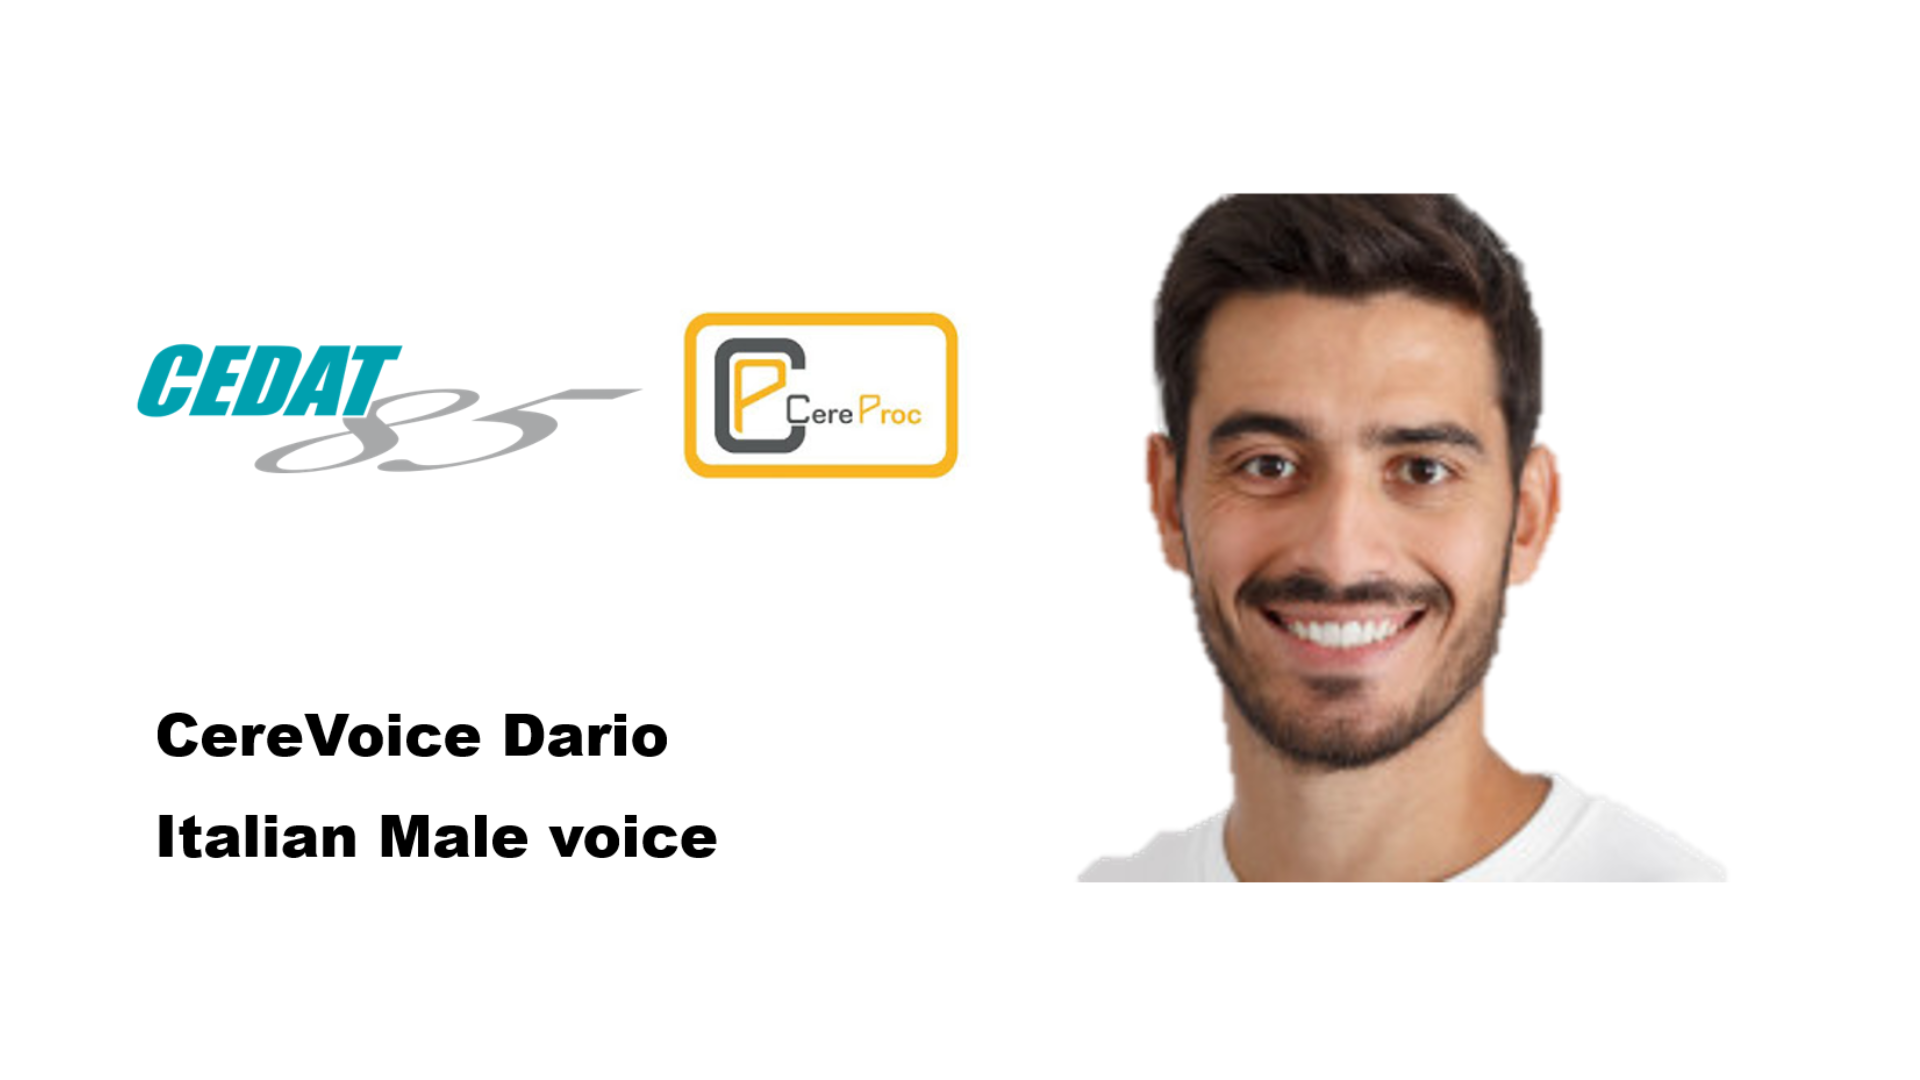 Image showing the face of a young man impersonating the digital assistant called Dario.